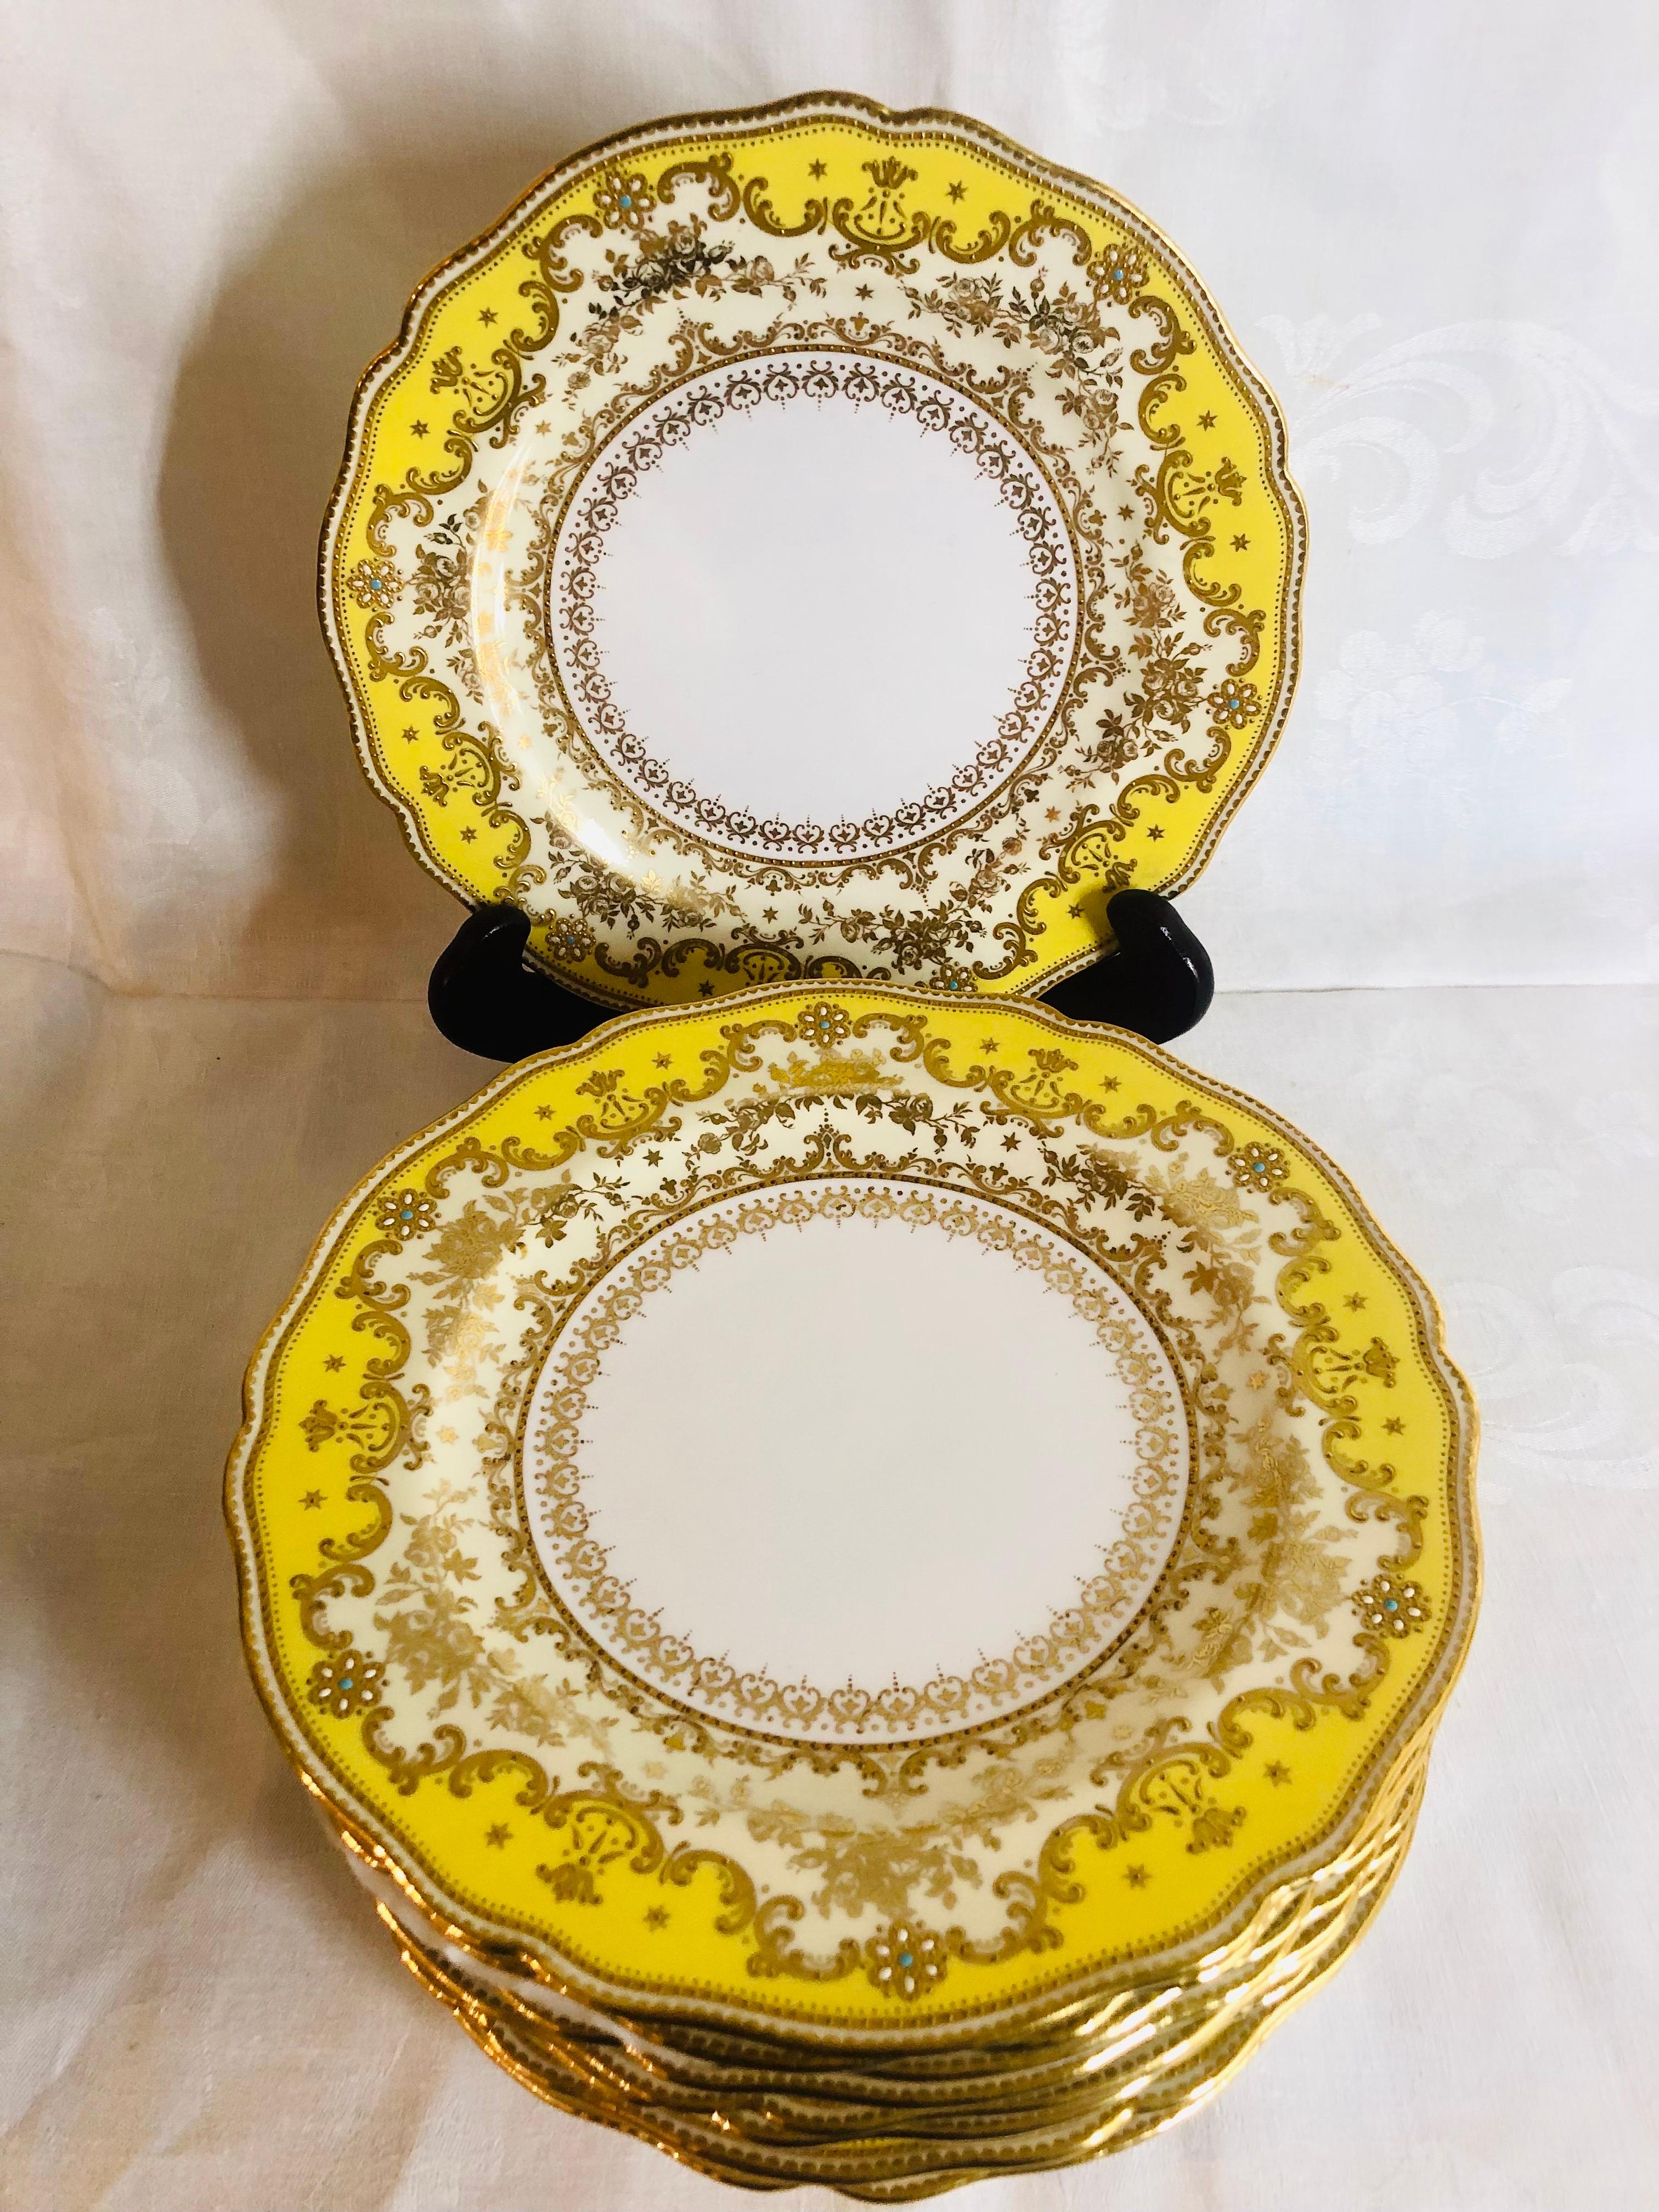 This is an absolutely stunning set of eleven yellow luncheon or dessert plates made of Copeland's jeweled porcelain. Each plate has a yellow fluted border with raised gold arabesque decoration. Inside this outer border, is a cream border with a gold